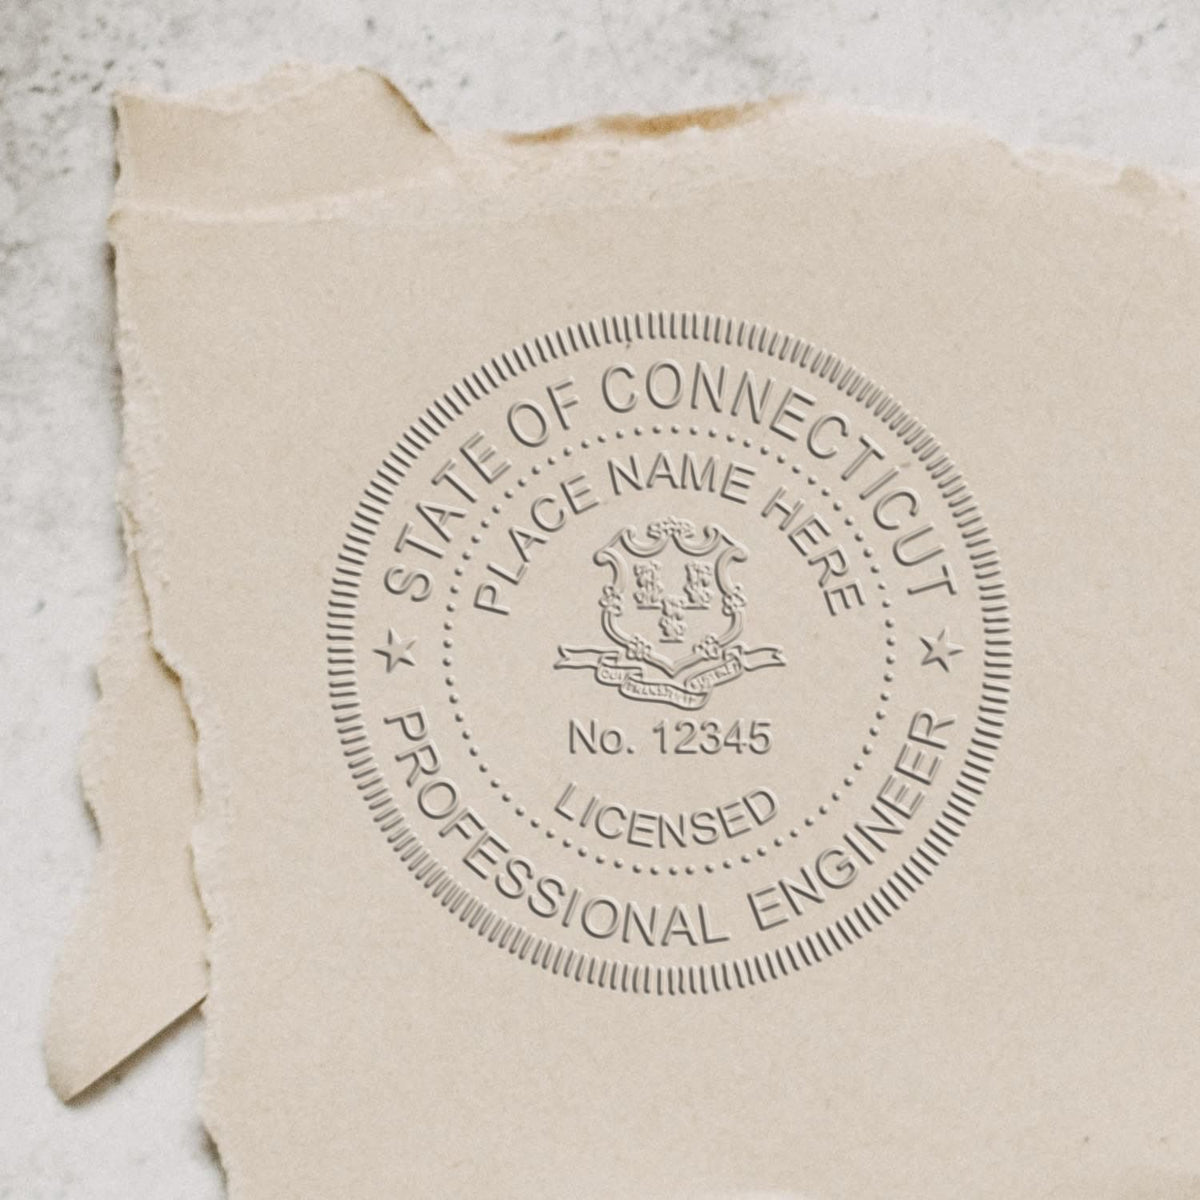 An alternative view of the Heavy Duty Cast Iron Connecticut Engineer Seal Embosser stamped on a sheet of paper showing the image in use